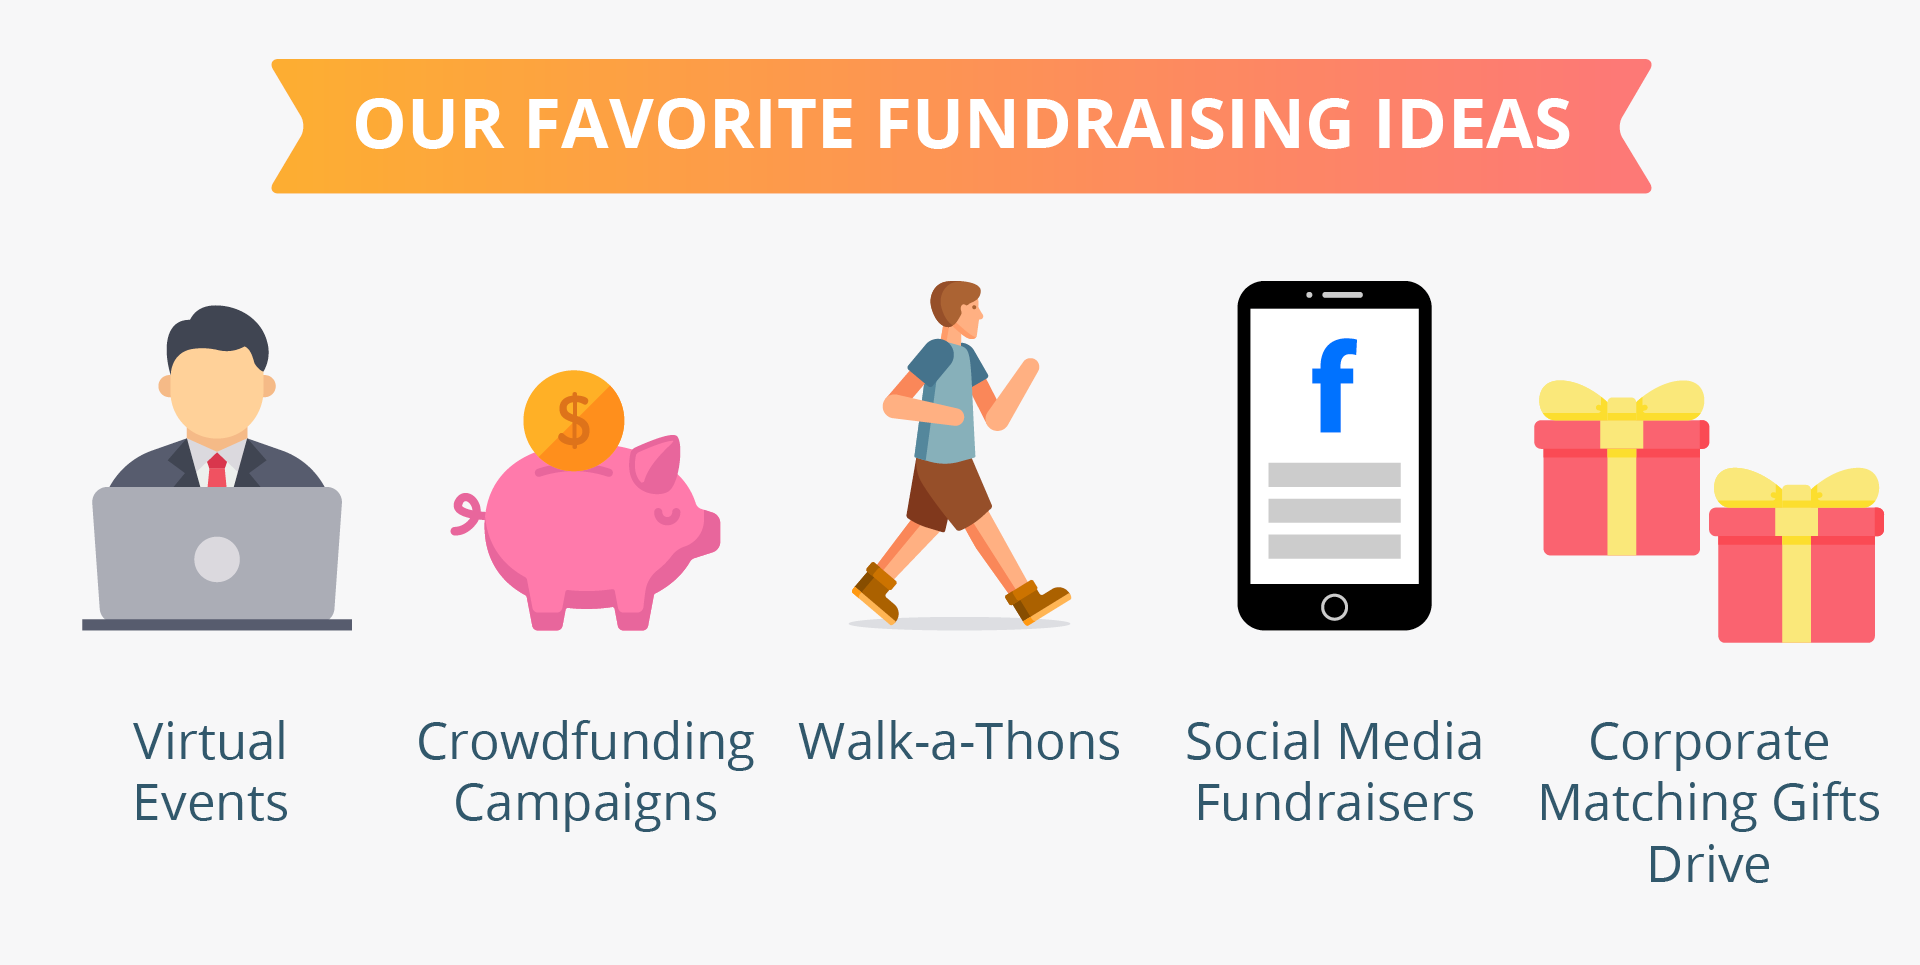 Our Favorite Fundraising Ideas: Virtual events, crowdfunding, walk-a-thons, social media fundraisers, corporate matching gifts